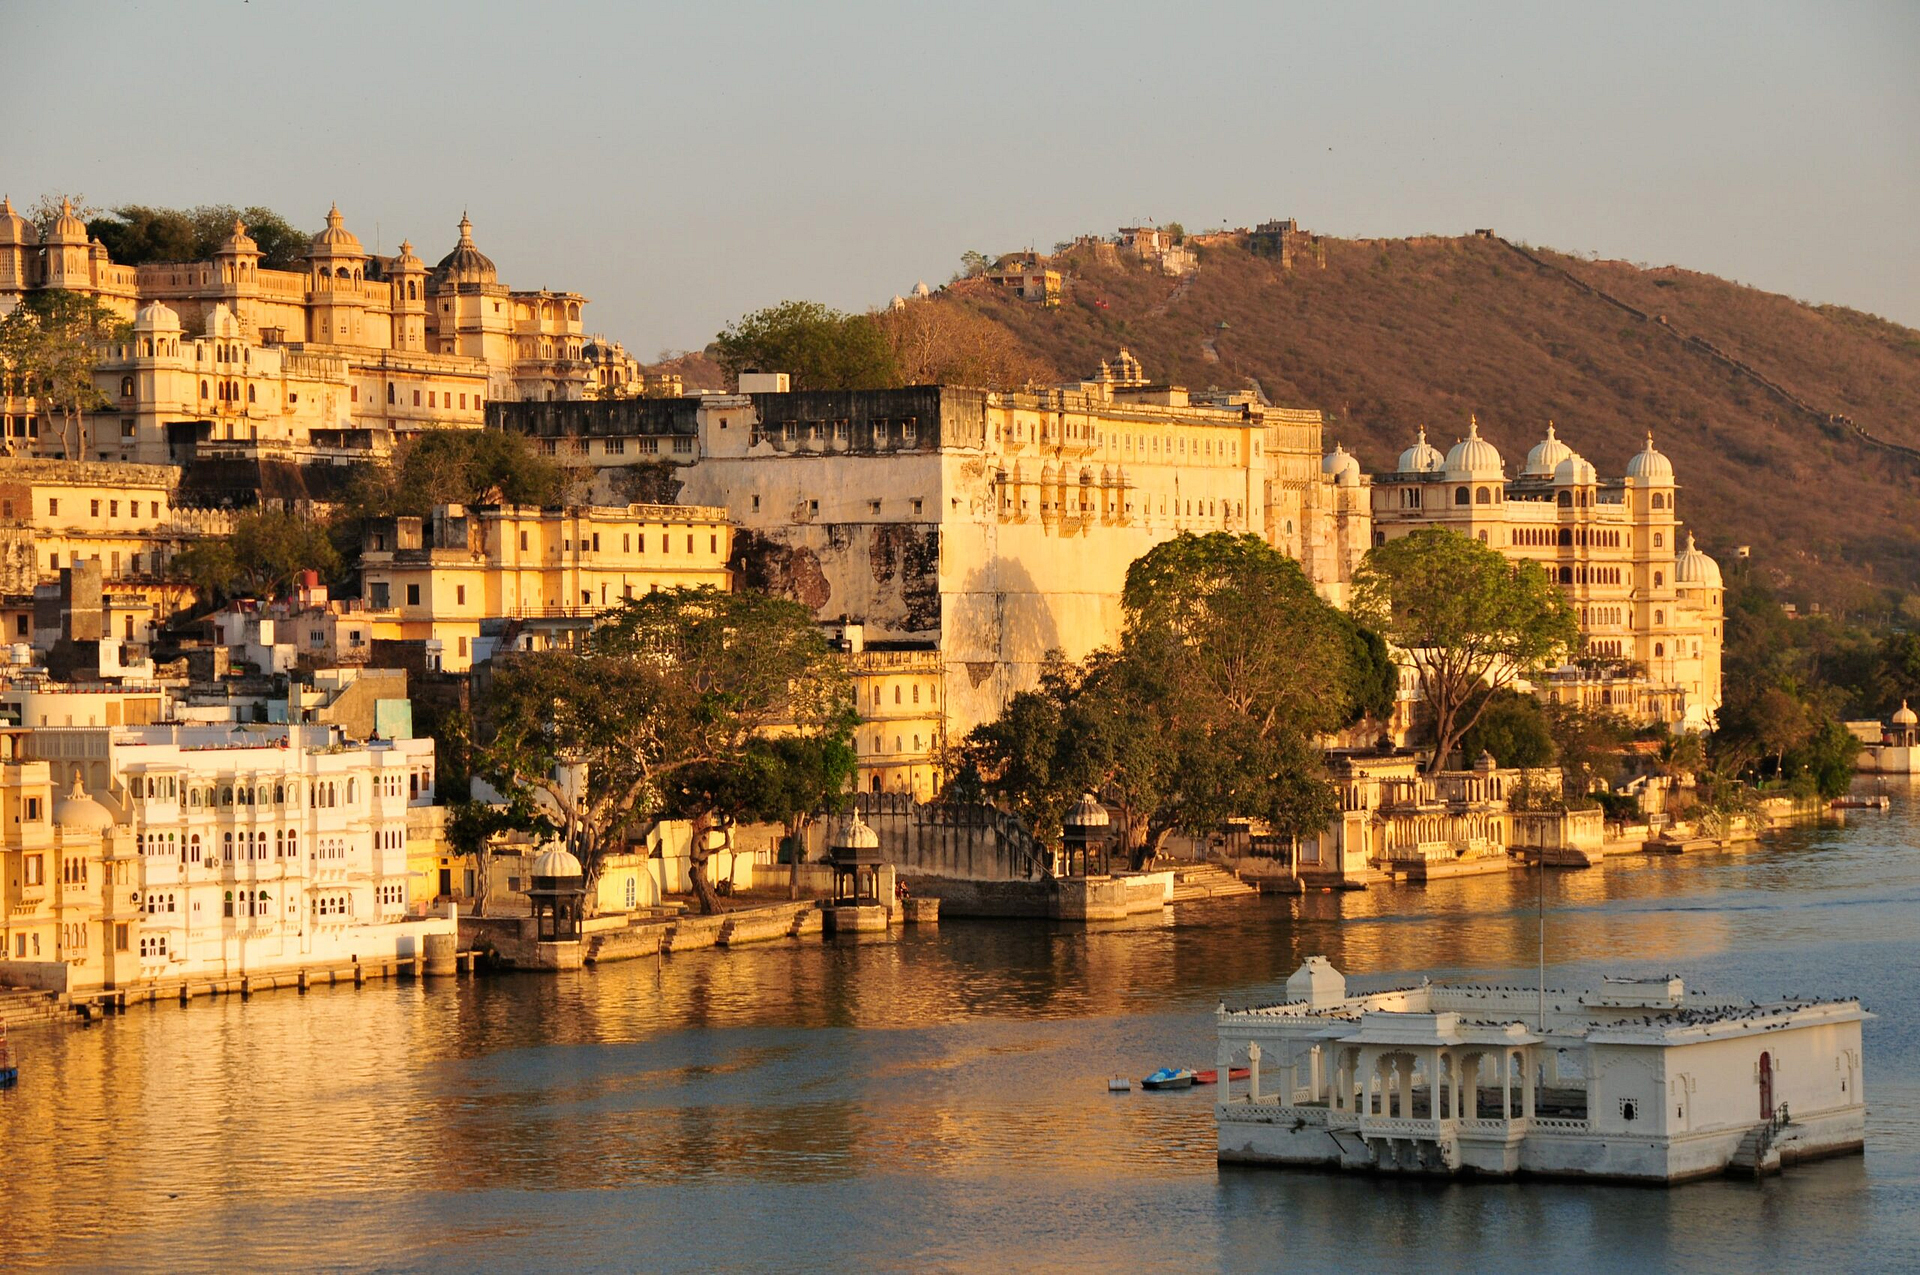 Udaipur – The most romantic spot in India